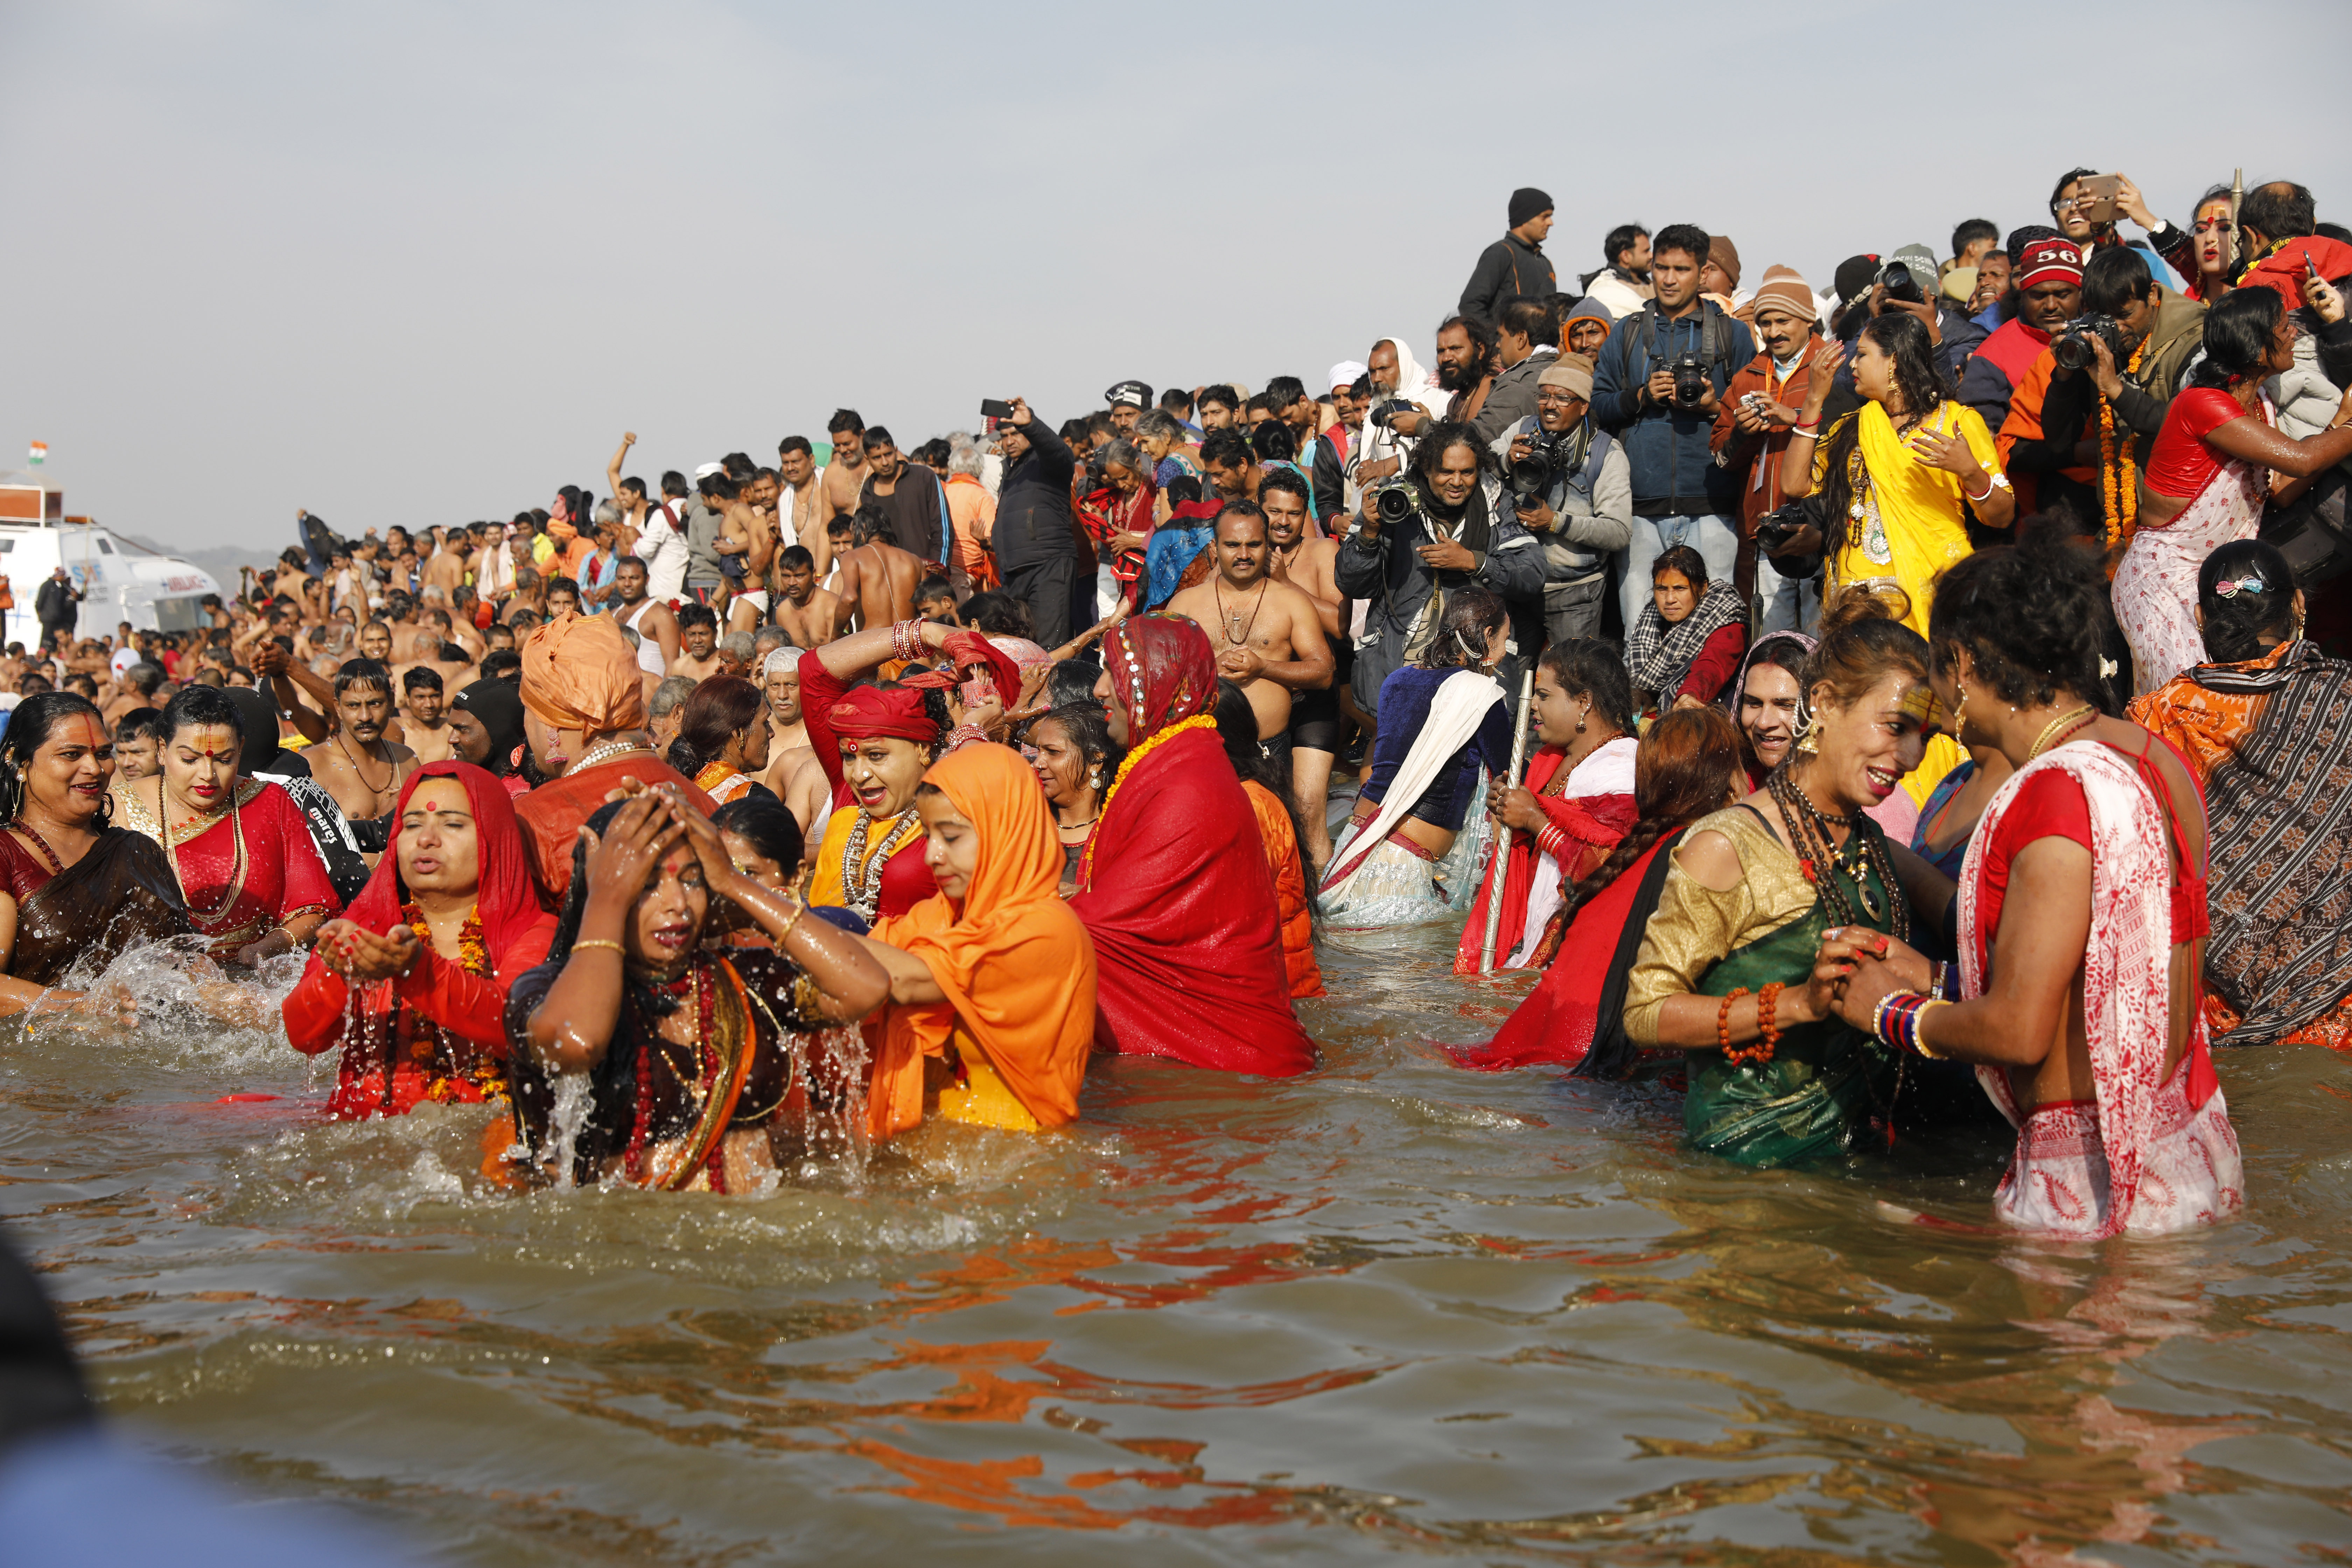 Members of Kinnar Akhara for transgenders take ritualistic dips on the auspicious Makar Sankranti day during the Kumbh Mela, or pitcher festival, in Prayagraj, Uttar Pradesh state, India, Tuesday, Jan. 15, 2019. The Kumbh Mela is a series of ritual baths by Hindu holy men, and other pilgrims at the confluence of three sacred rivers — the Yamuna, the Ganges and the mythical Saraswati — that dates back to at least medieval times. The city's Mughal-era name Allahabad was recently changed to Prayagraj. (AP Photo/Rajesh Kumar Singh)